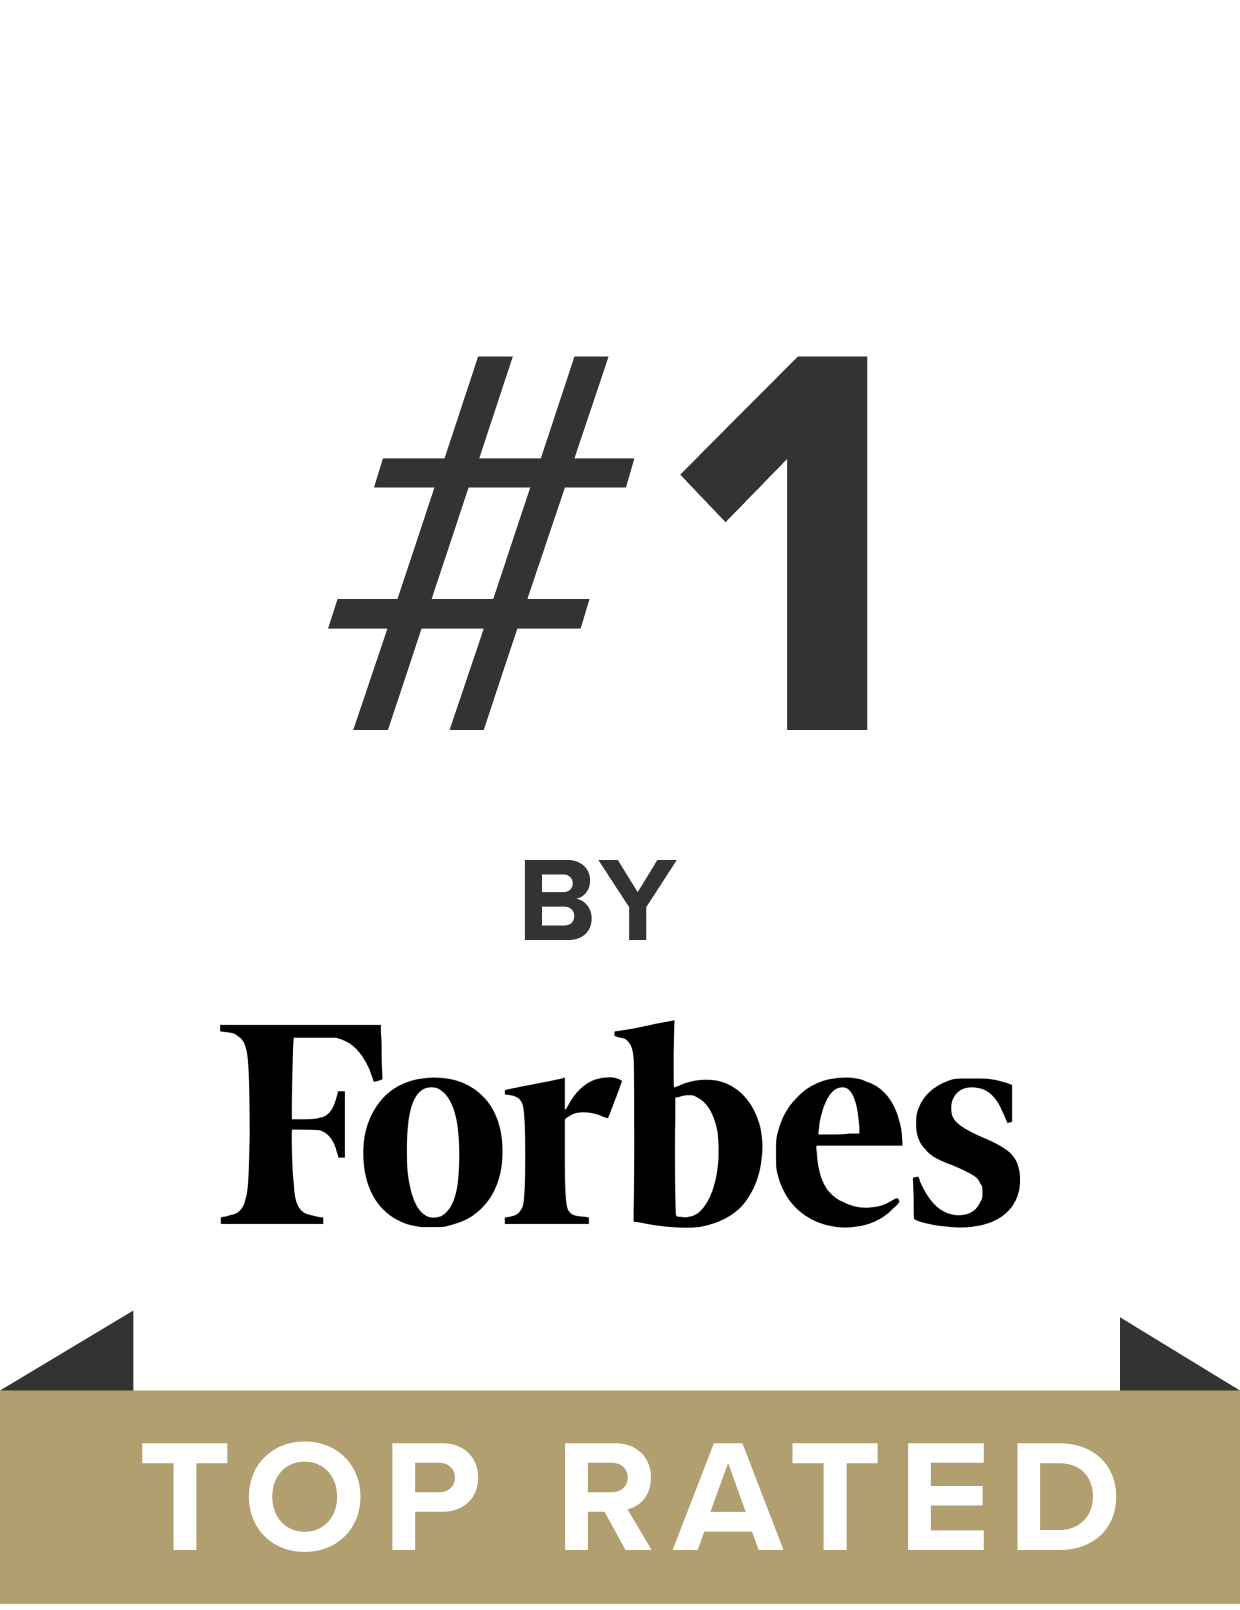 Top Rated by Forbes